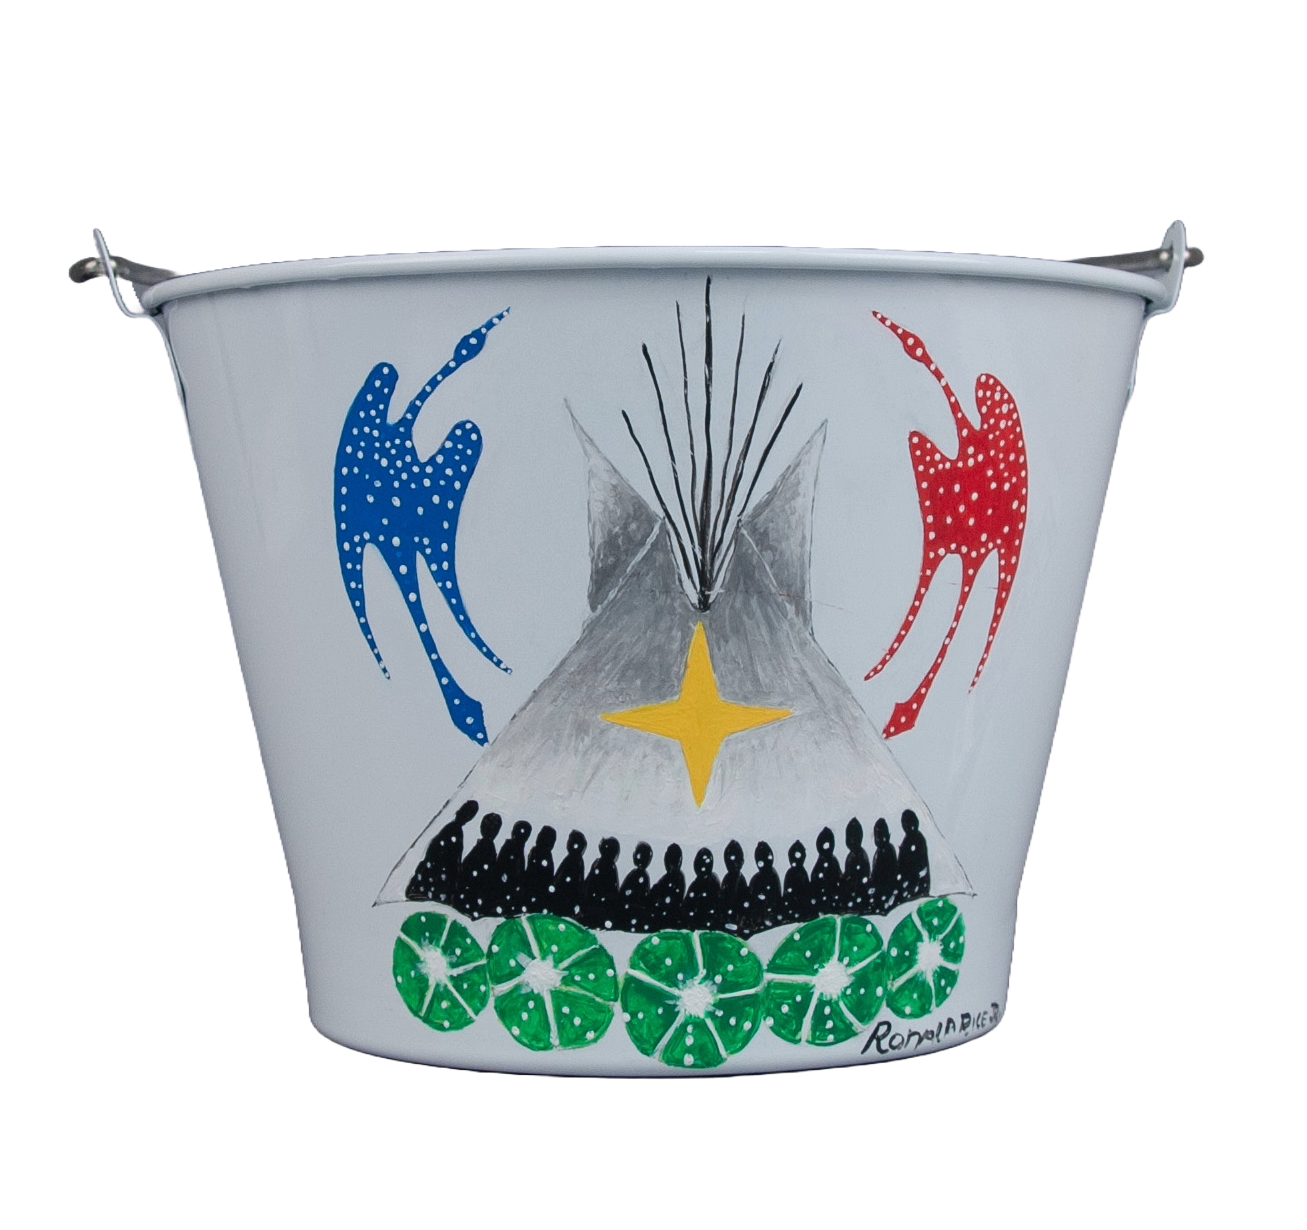 Detail picture of a painted metal water bucket. The background is white with a tipi painted in the center with black silhouettes of people sitting inside. Five round green plants are pictured below the tipi, and on either side are birds, one blue, the other red. At the center of the painting is a yellow four-pointed star.